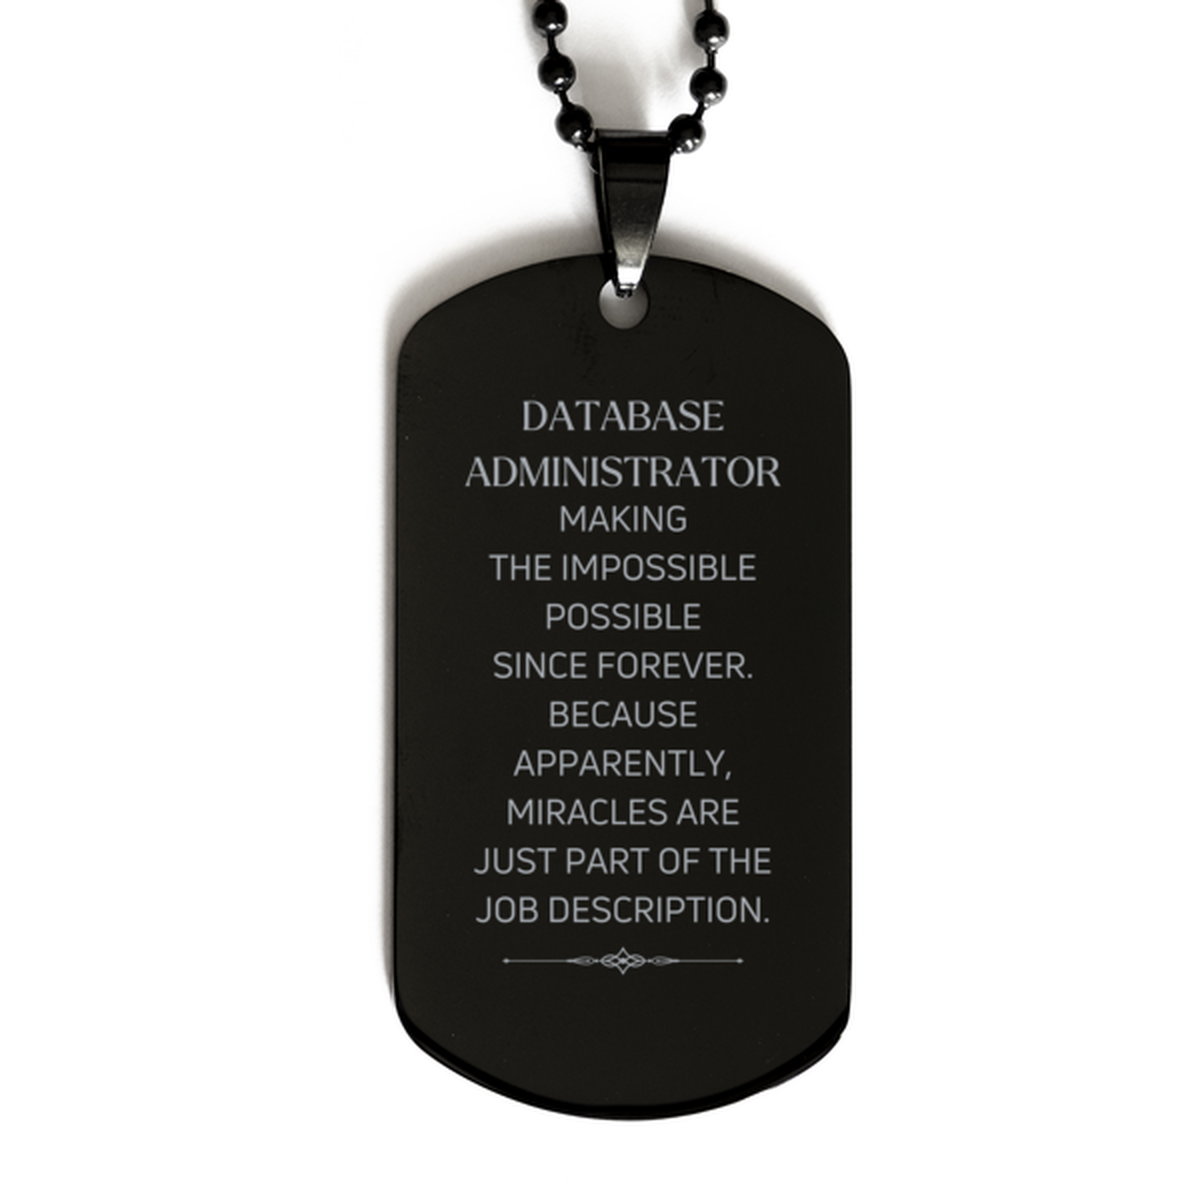 Funny Database Administrator Gifts, Miracles are just part of the job description, Inspirational Birthday Black Dog Tag For Database Administrator, Men, Women, Coworkers, Friends, Boss